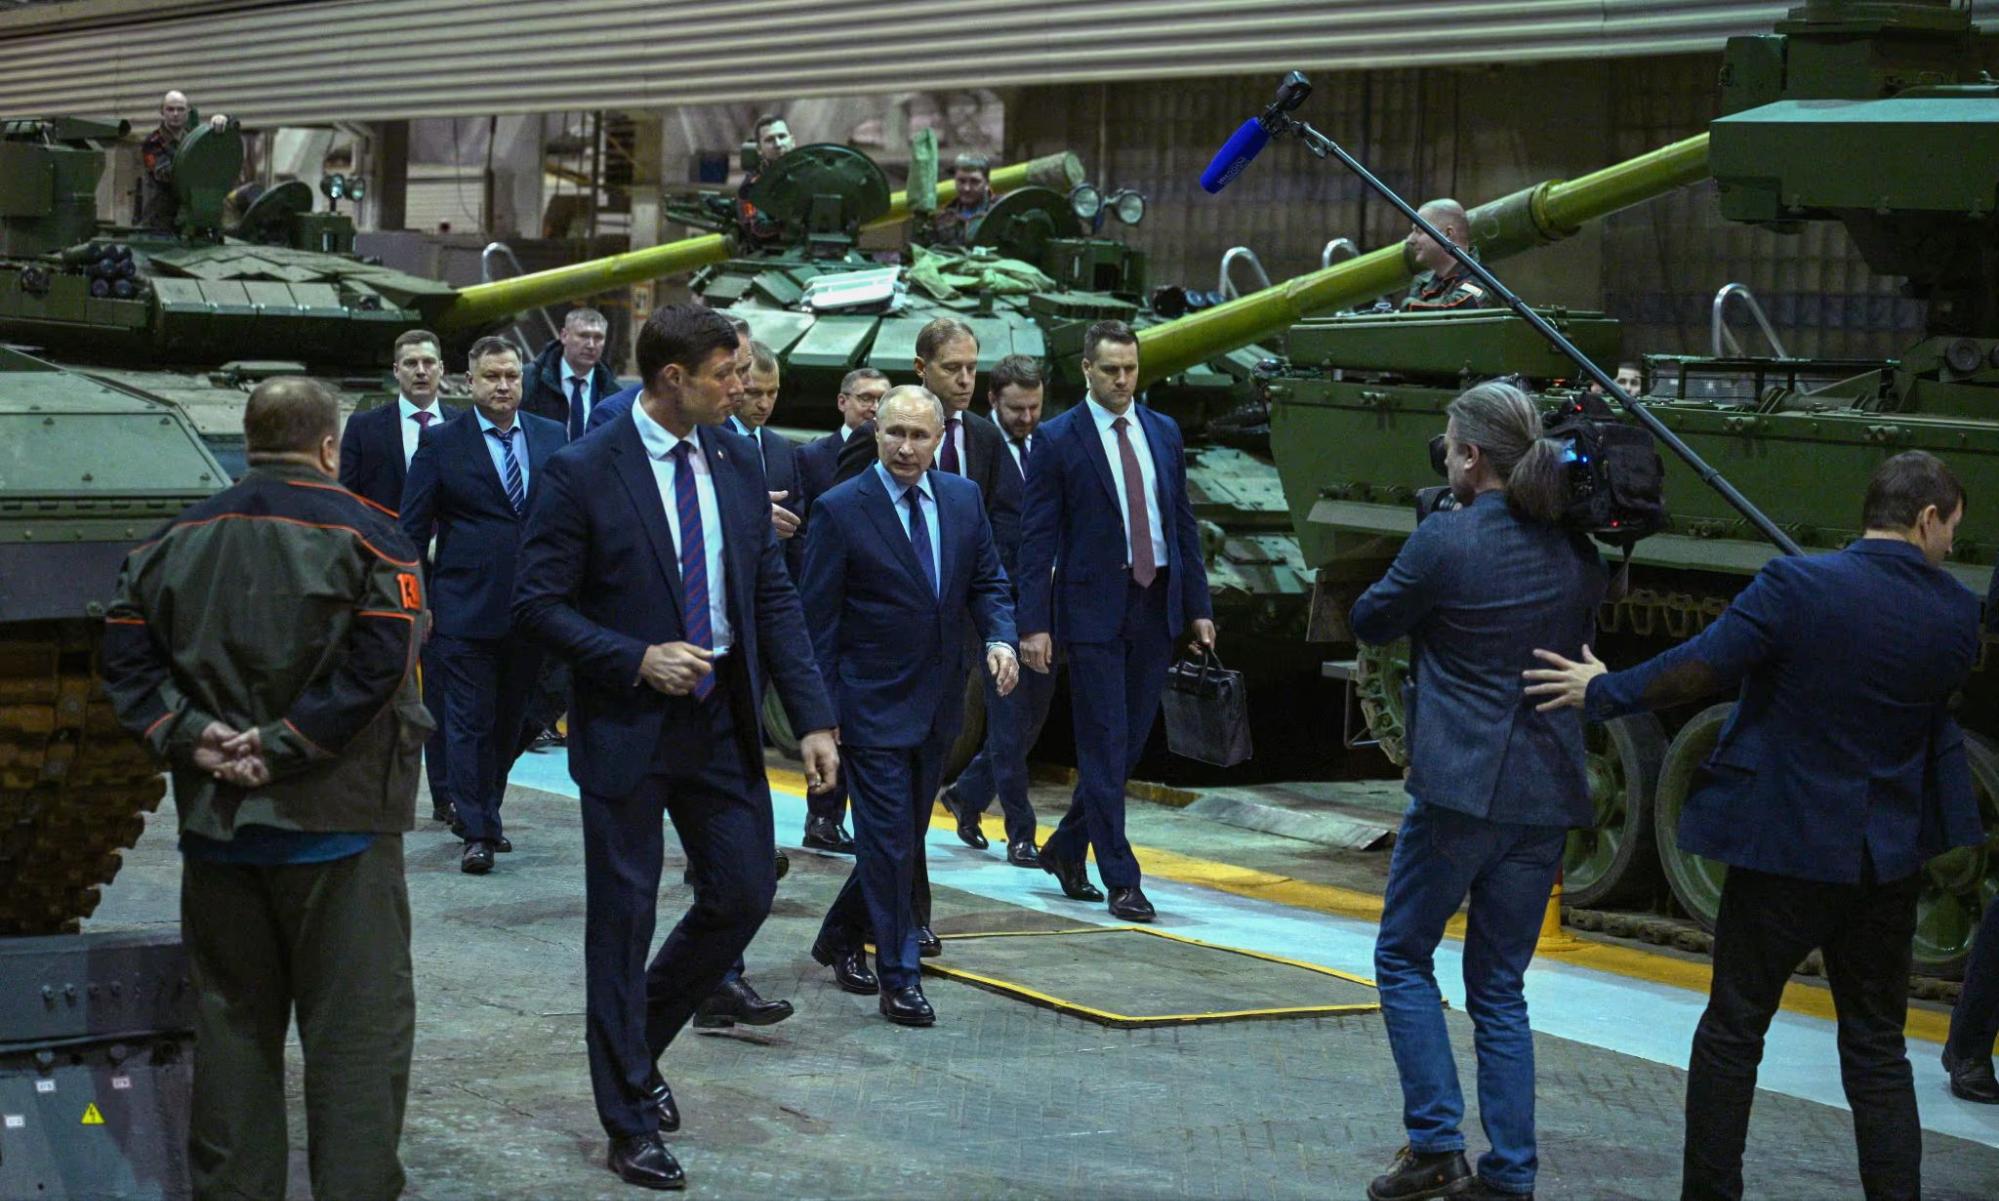 Russian President Vladimir Putin, on a visit to Uralvagonzavod, the country's largest tank producer